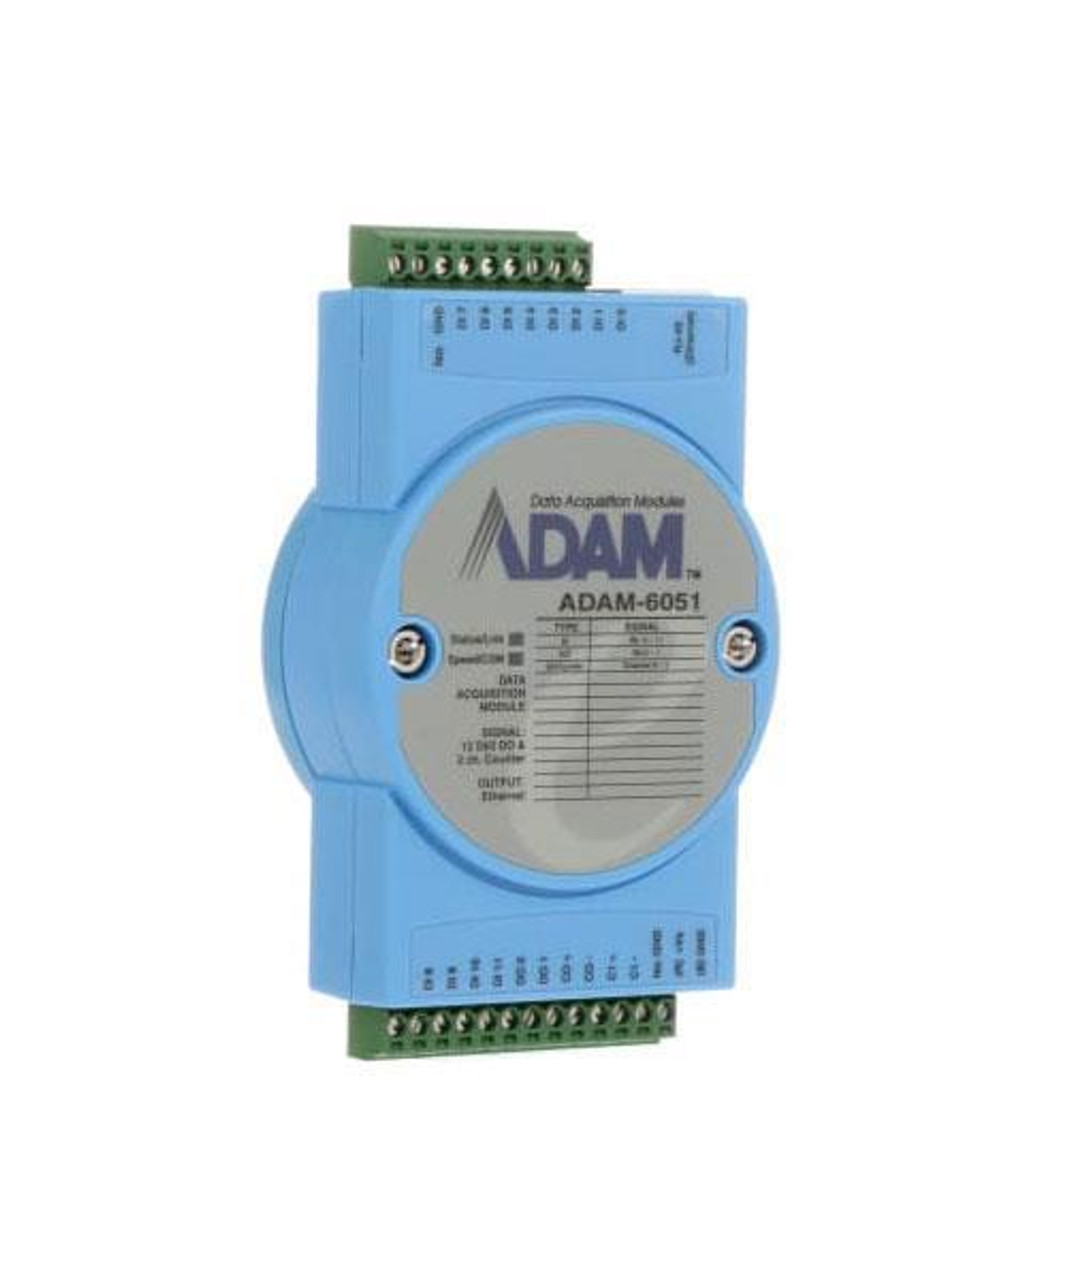 ADAM-6051-D Advantech 14-Channel Isolated Digital I/O Modbus TCP Module with 2-Channel Counter 1 x Network (RJ-45) Fast Ethernet